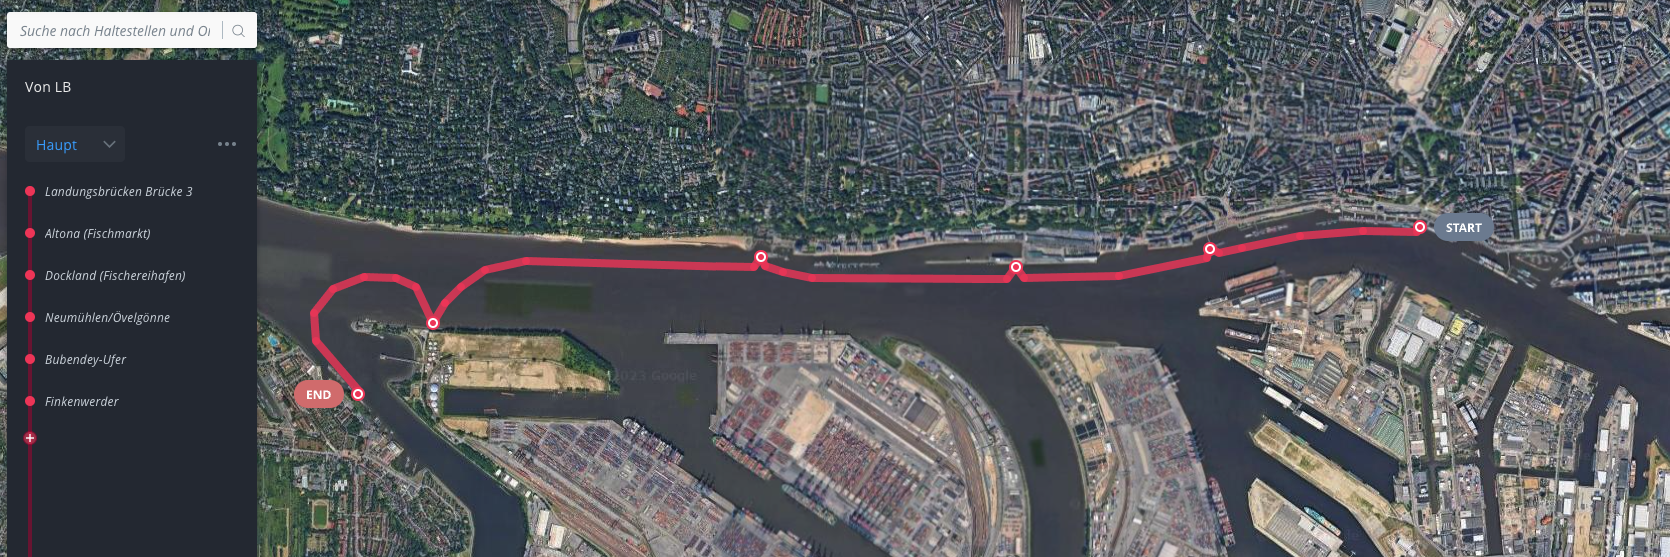 HADAG’s route 62, Landungsbrücken Finkenwerder, one of their key lines, recreated in Optibus Planning. Using satellite imagery and street-level data, planners can verify and adjust stop locations, and Optibus’ system will create an opt